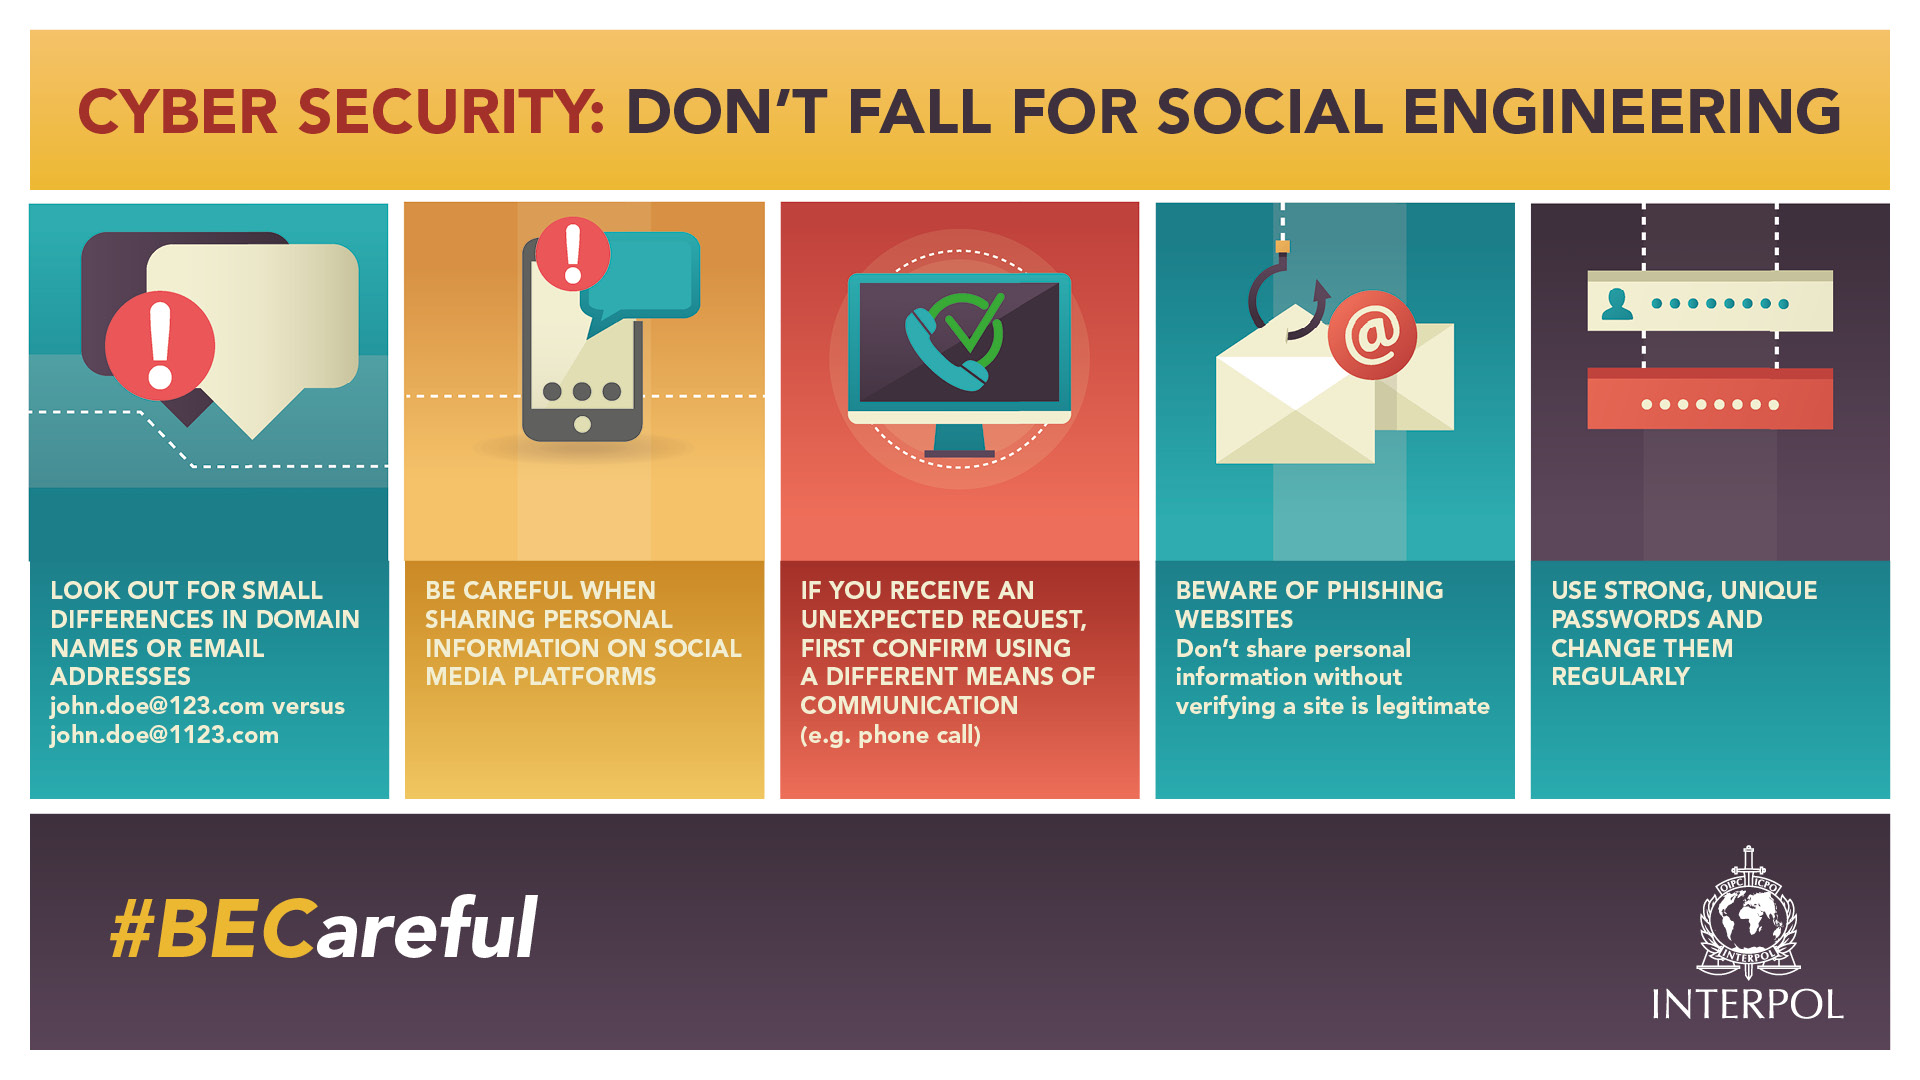 INTERPOL: Don't Fall For Social Engineering